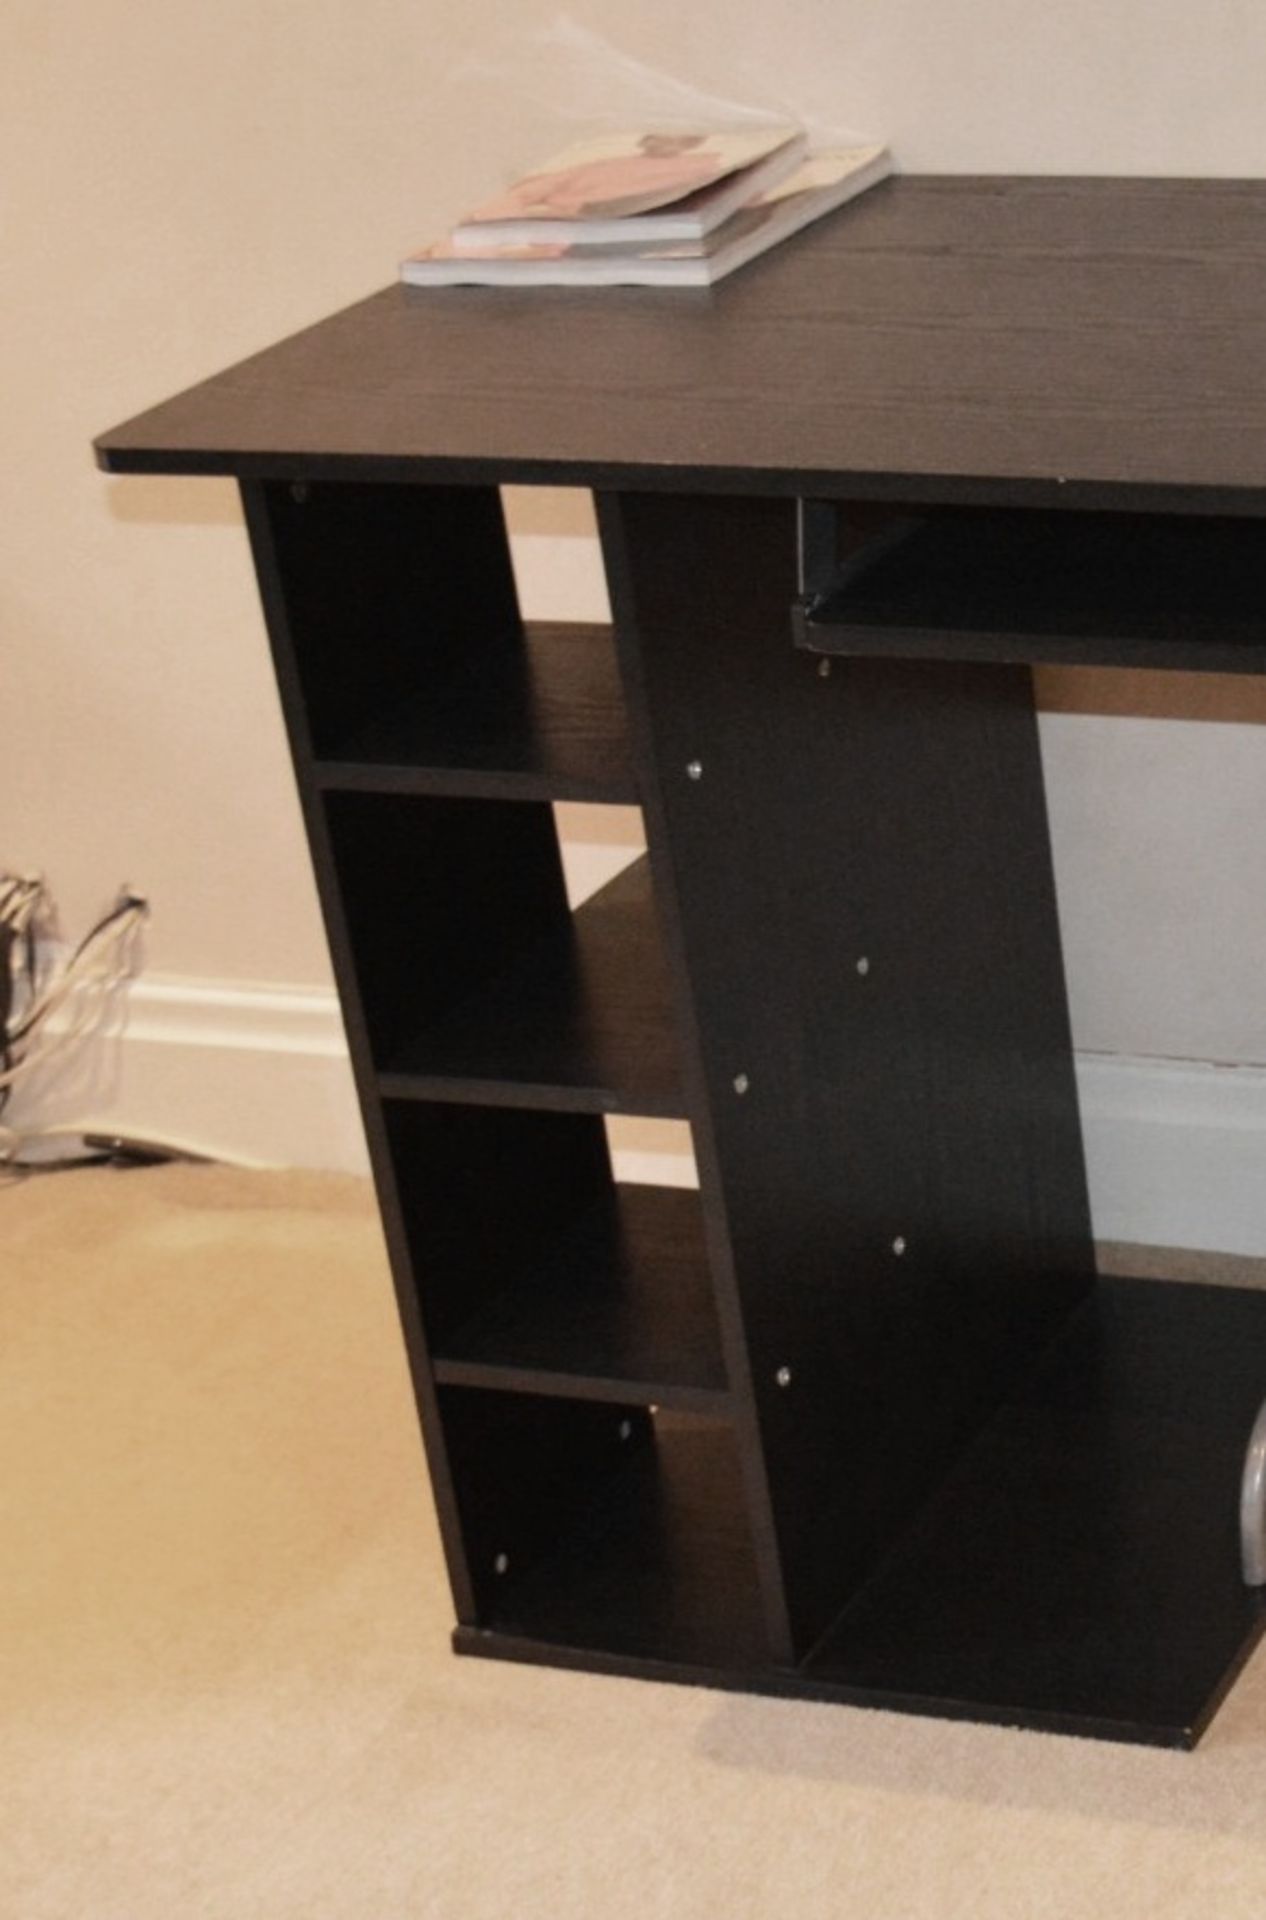 1 x Black Ash Desk With Slide-out Keyboard Shelf - Dimensions To Follow - NO VAT - Image 3 of 3